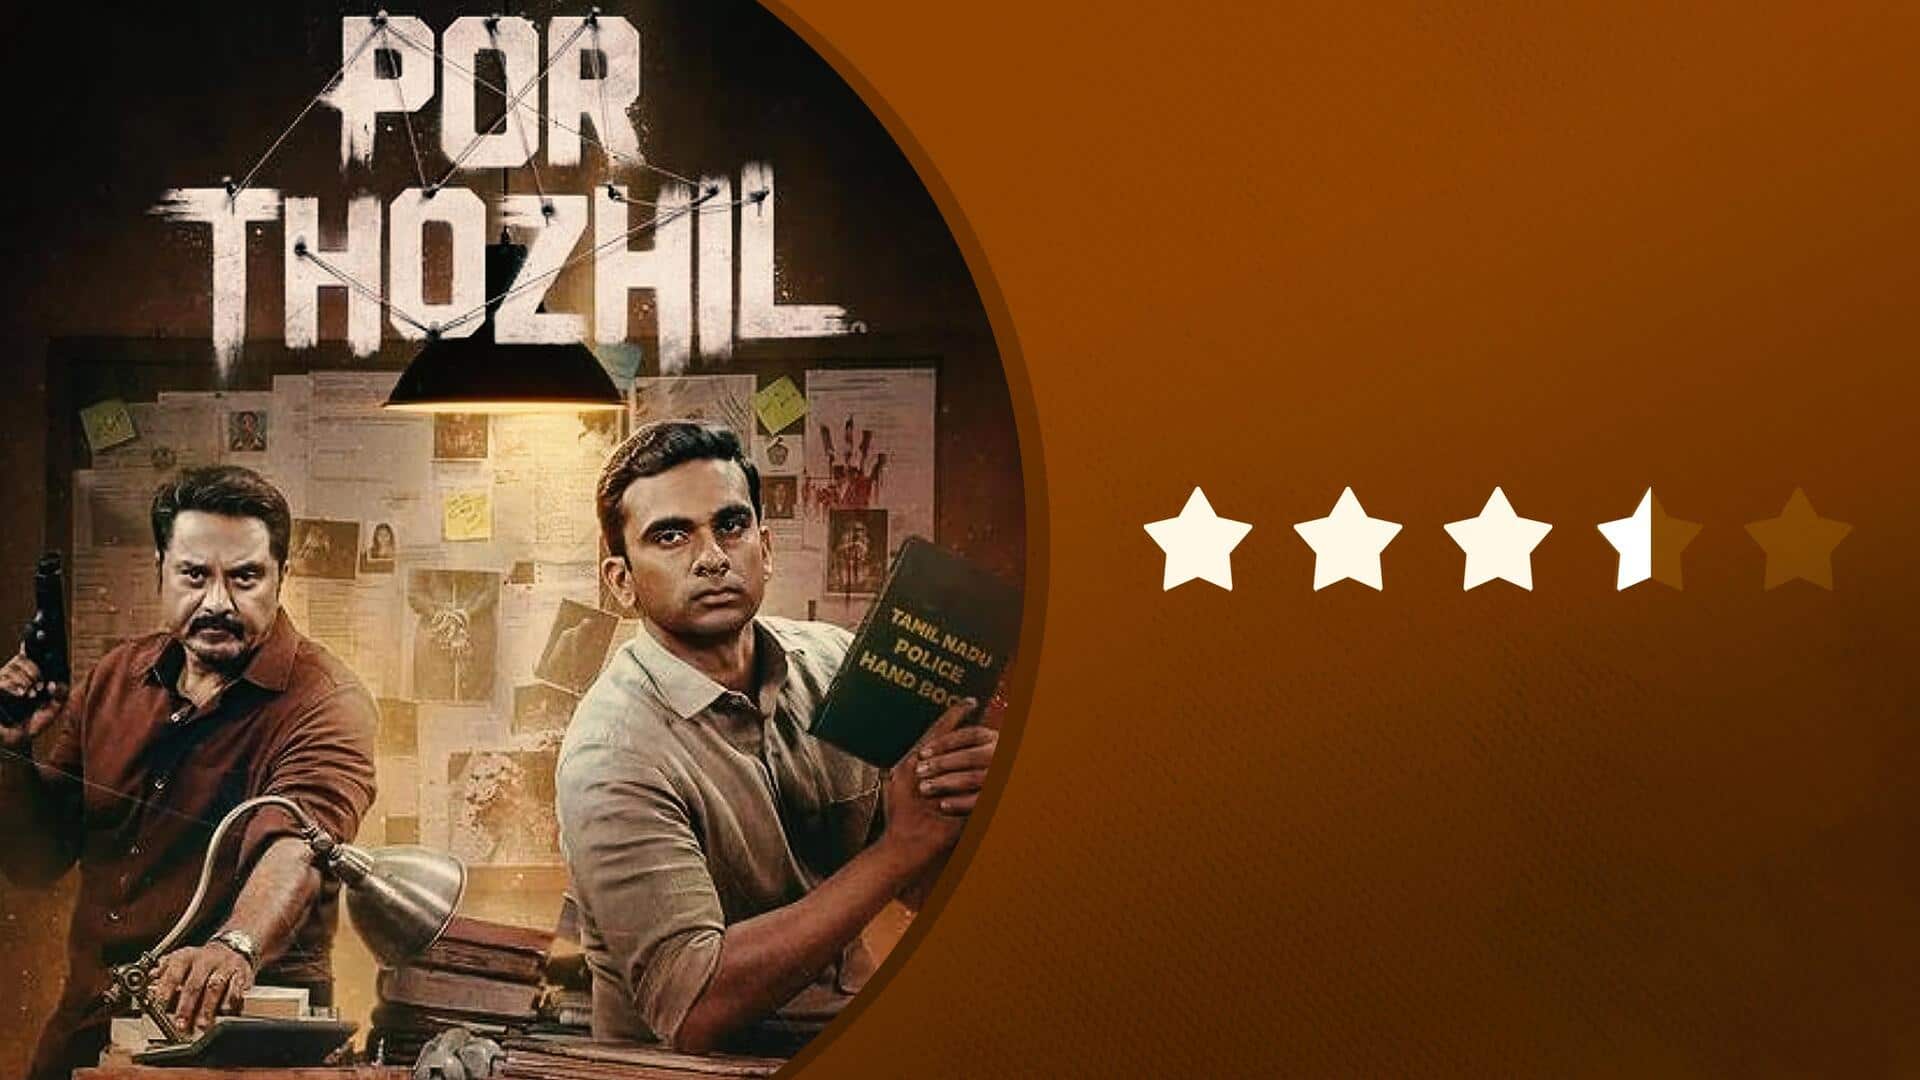 'Por Thozhil' review: Don't miss this fascinating, engaging crime thriller 